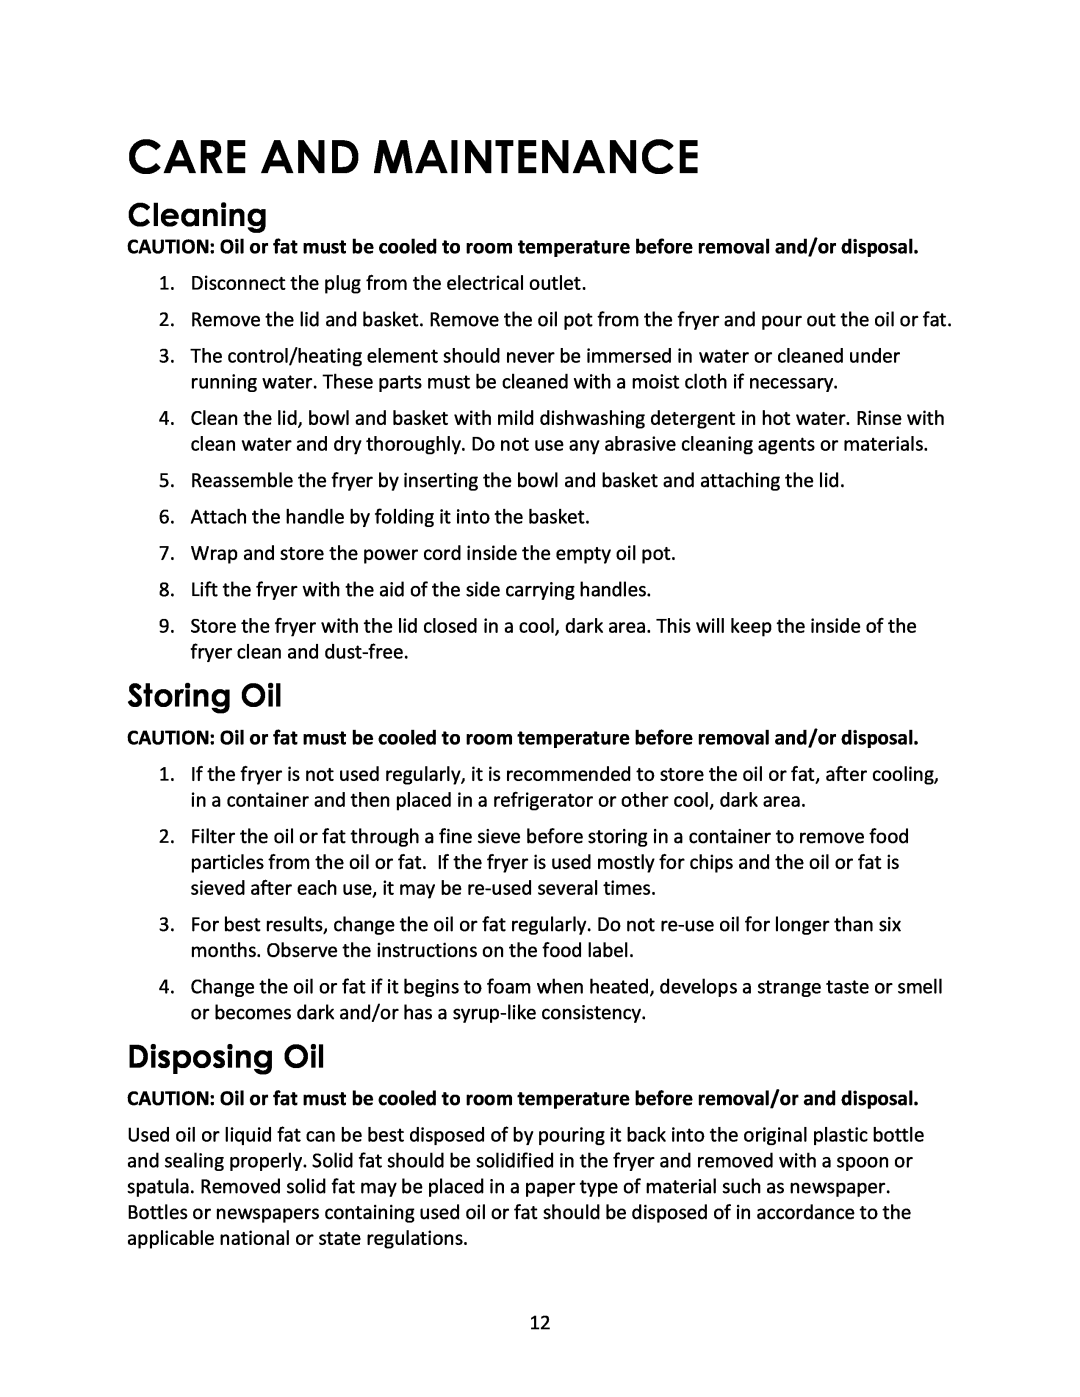 Magic Chef MCSDF12W instruction manual Care And Maintenance, Cleaning, Storing Oil, Disposing Oil 